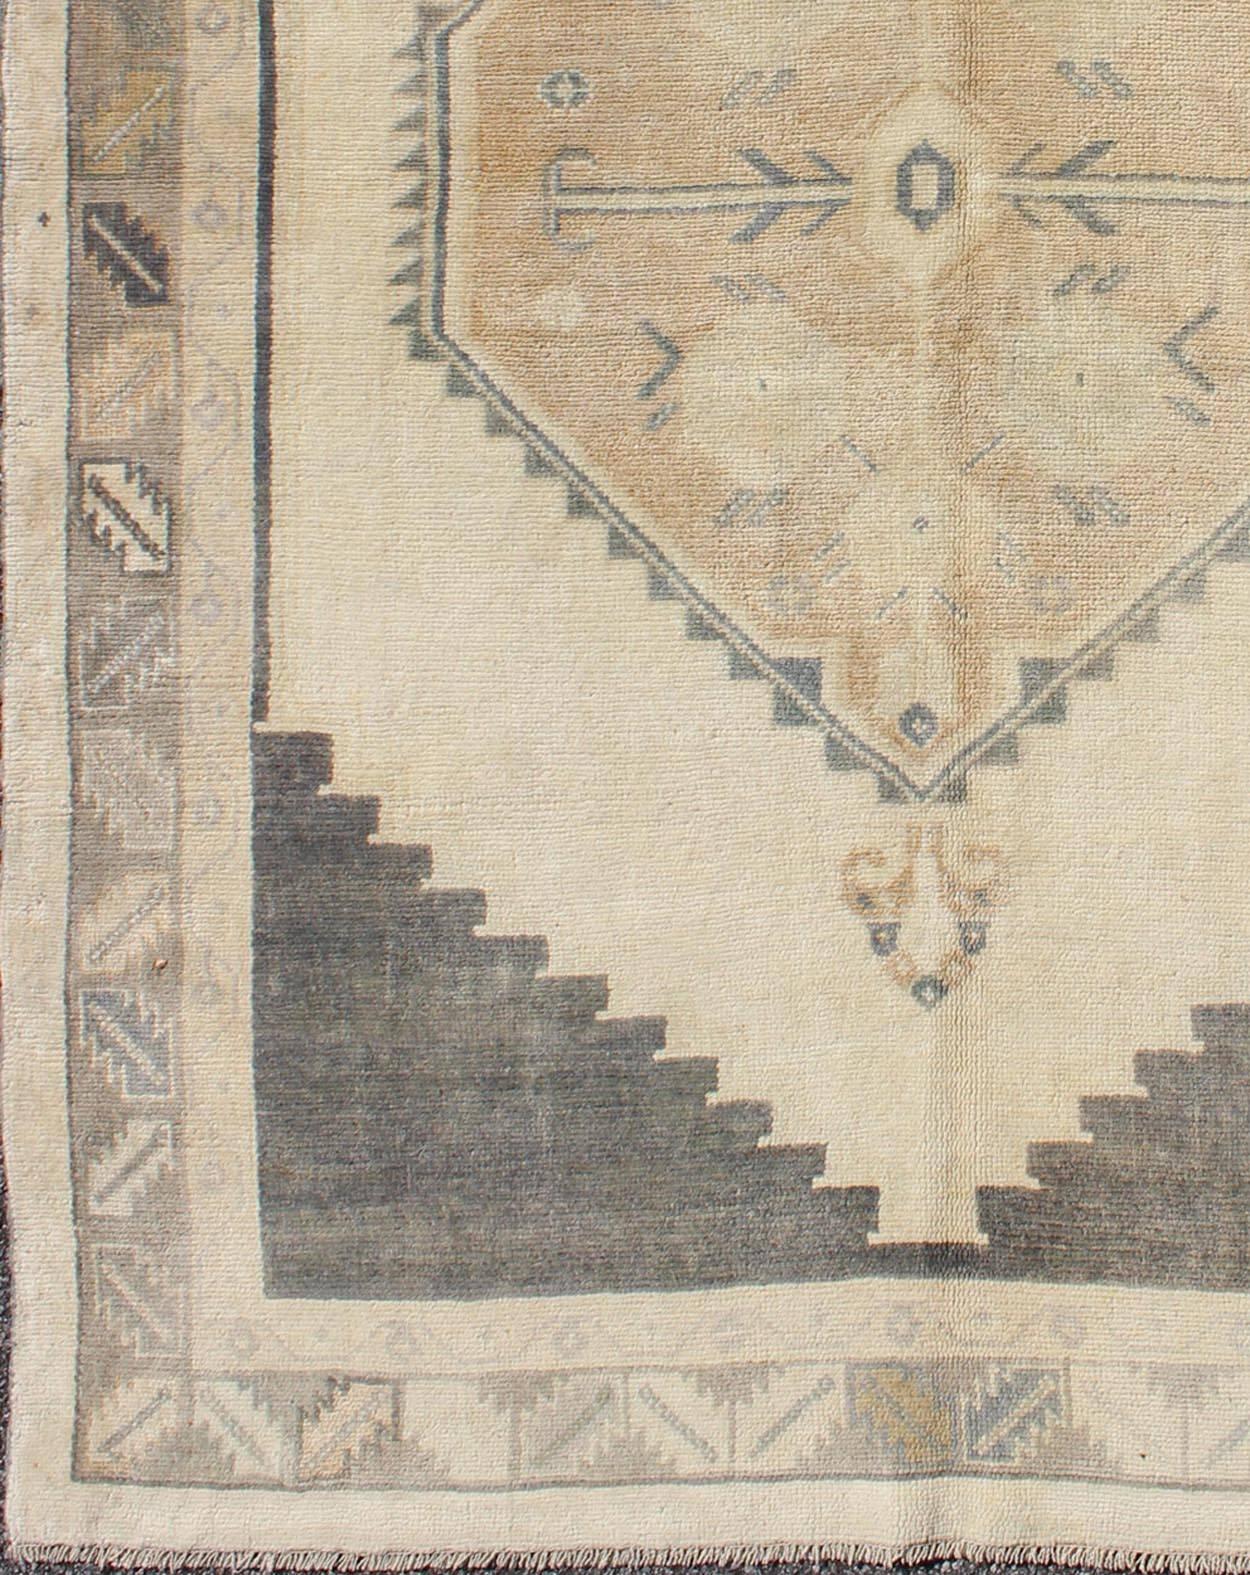 This vintage Turkish Oushak rug features an intricately beautiful design with a tribal aesthetic. The stylized central medallion is surrounded by multi-layers in the central field. The various shades of taupe, charcoal, grey and cream blend